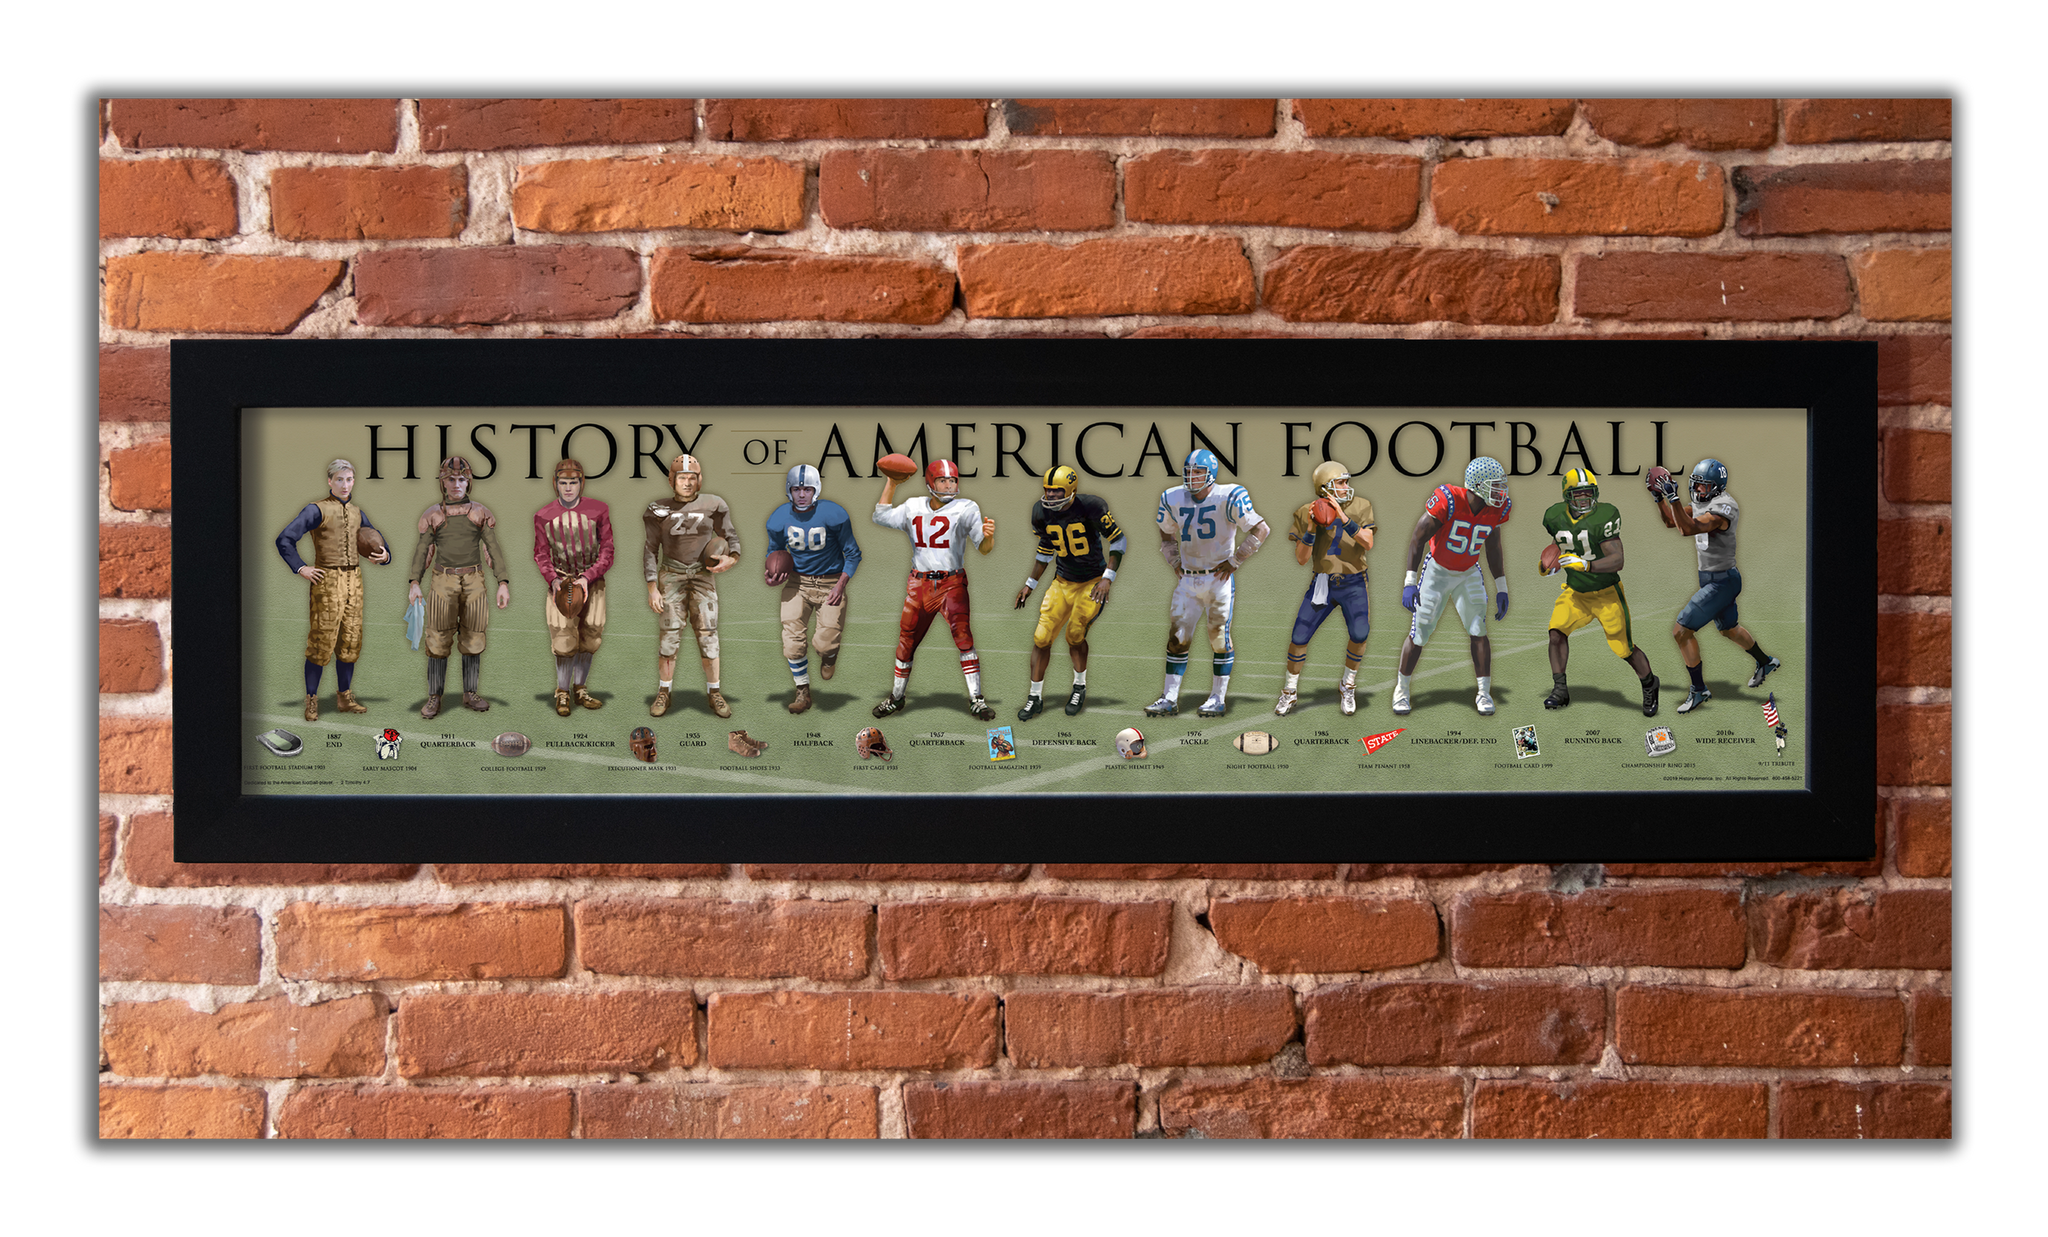 Football - Framed 1”, printed with a matte finish, 6" x 24”